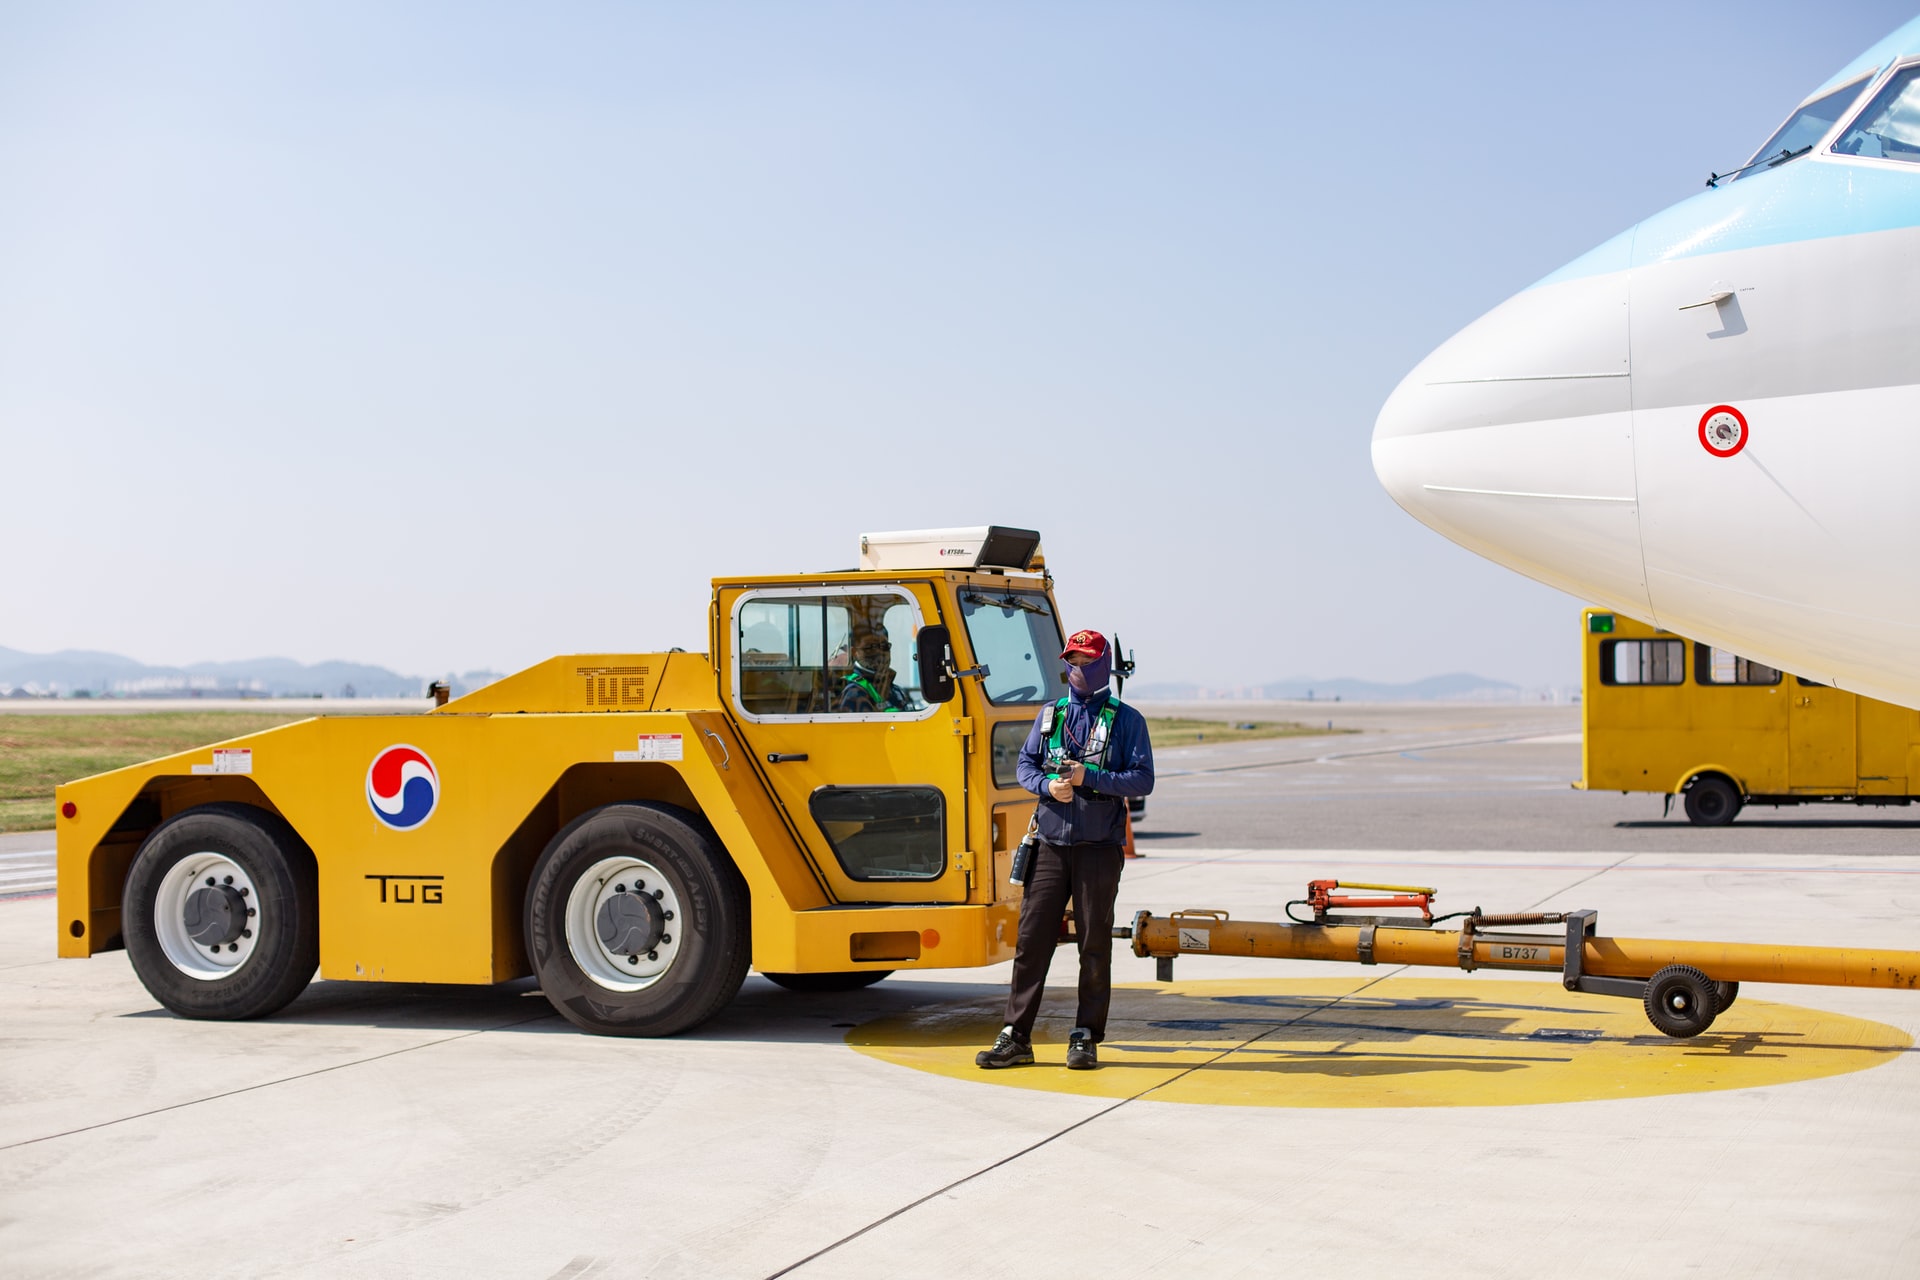 A ground staff member standing by the aircraft which is ready to be pushed to the runway.